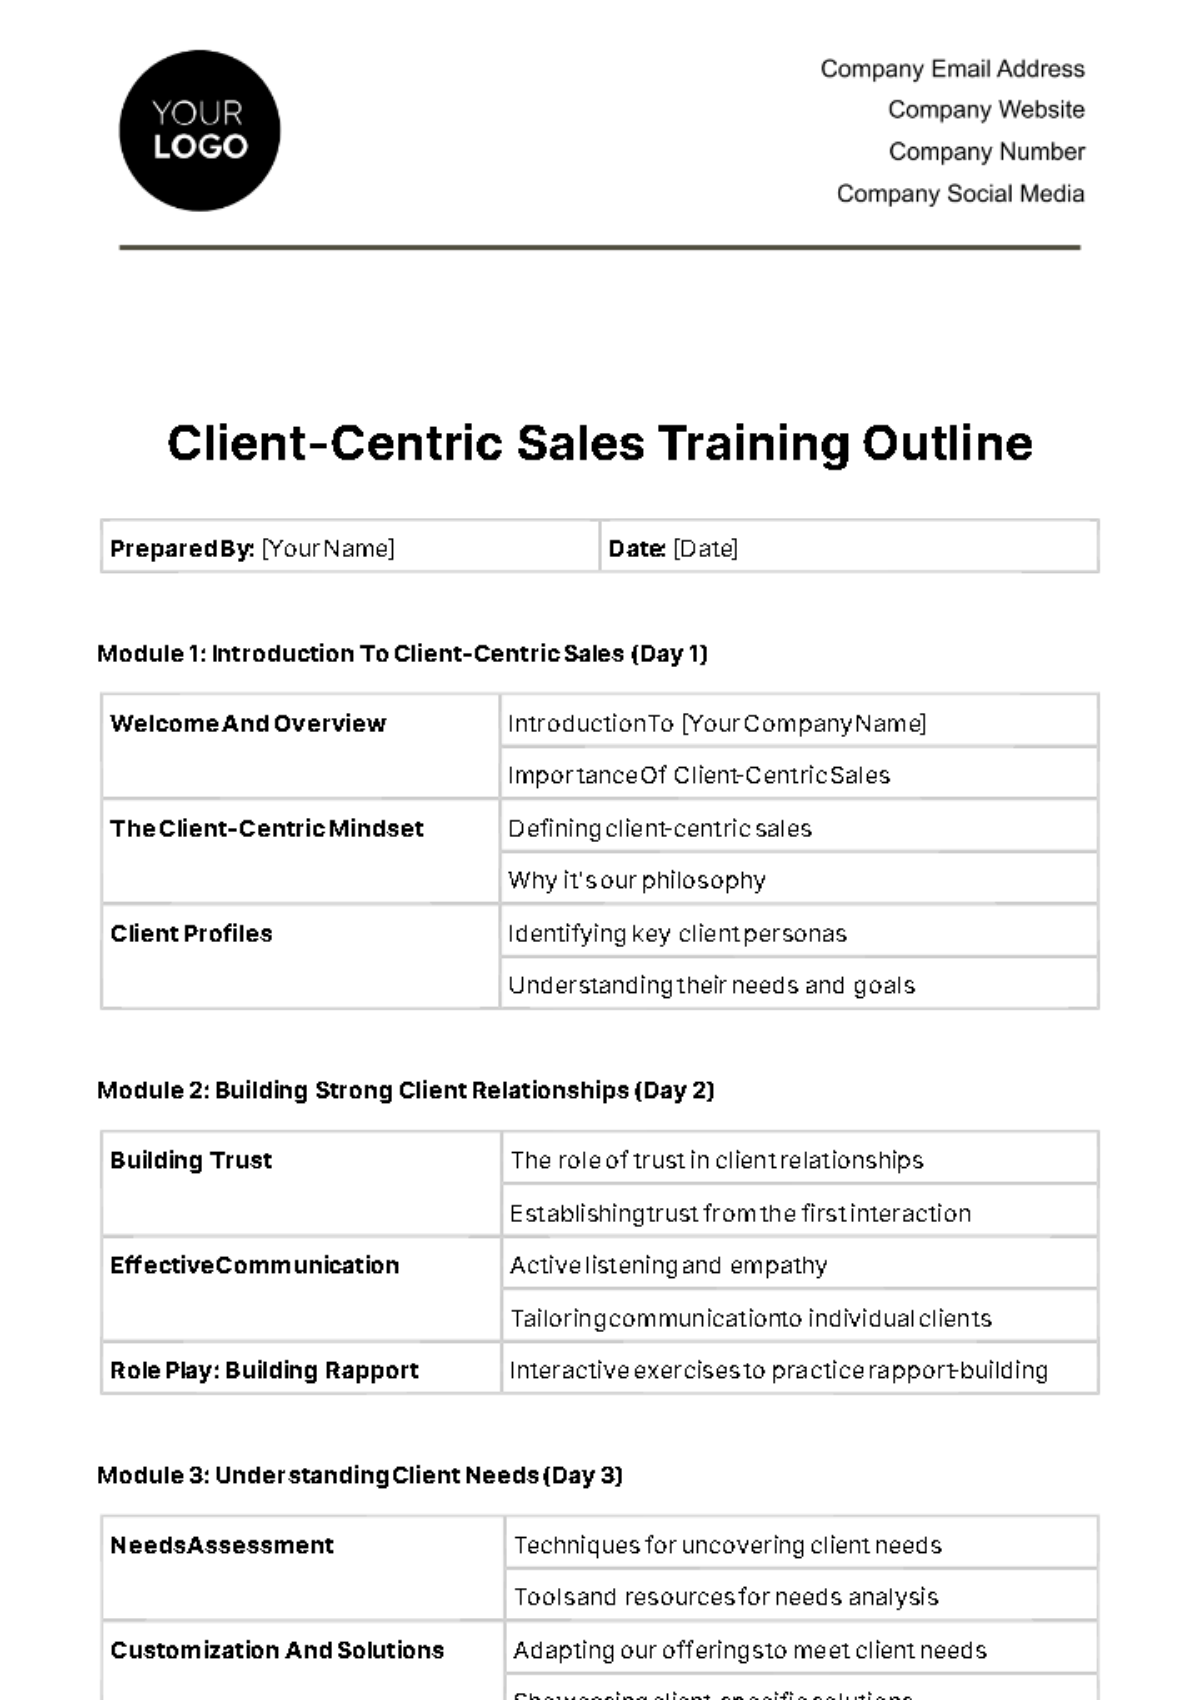 Free Client-centric Sales Training Outline Template